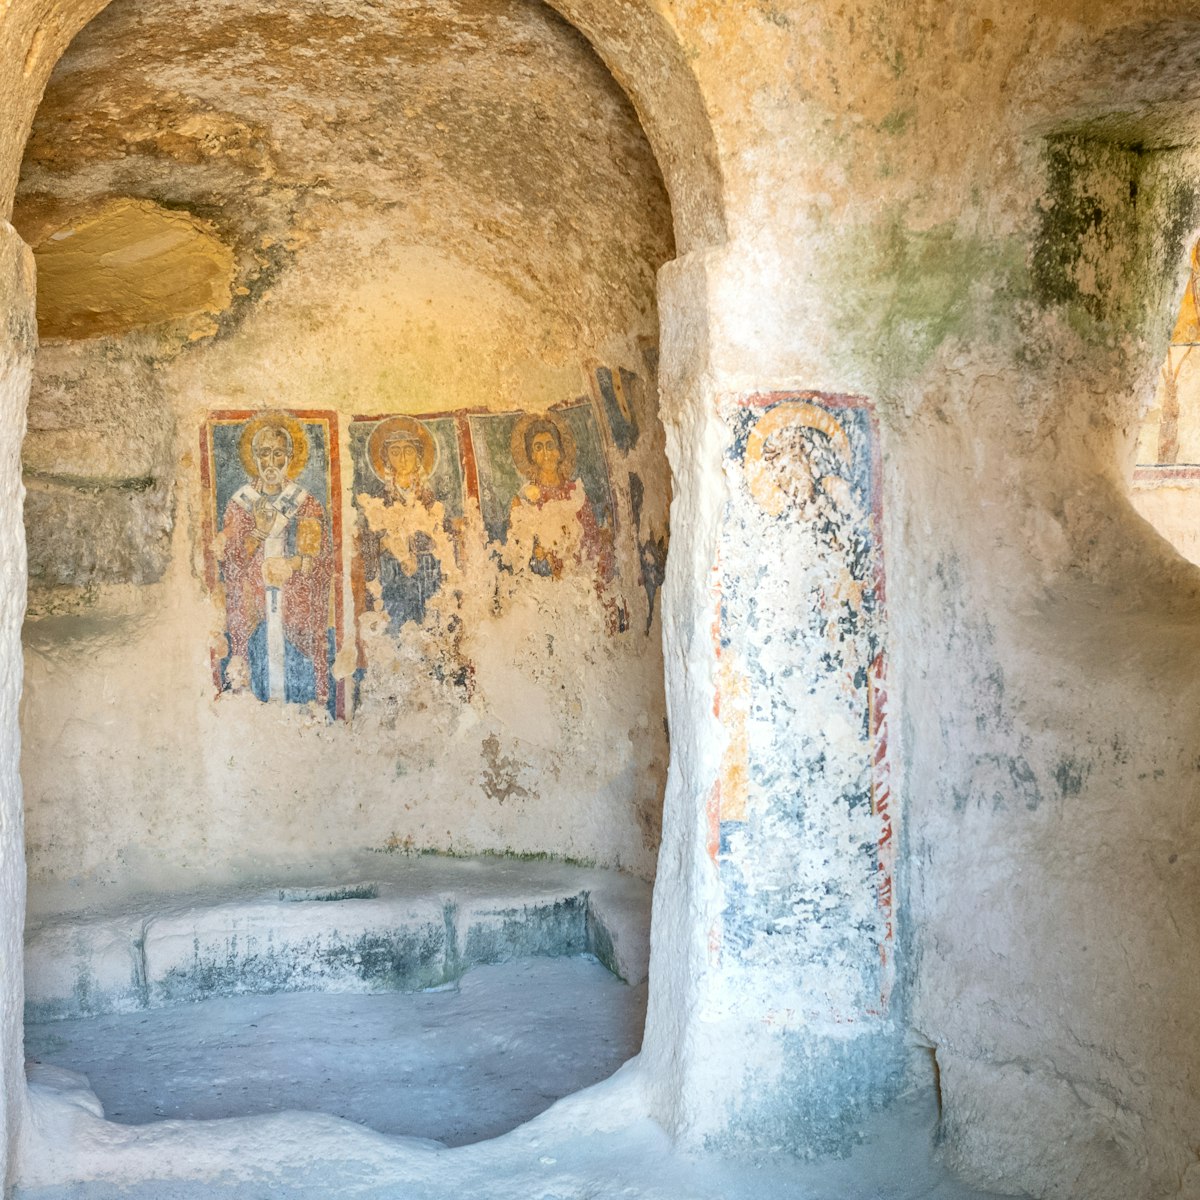 The ancient frescoes of the Madonna Delle Virtu rocky church.